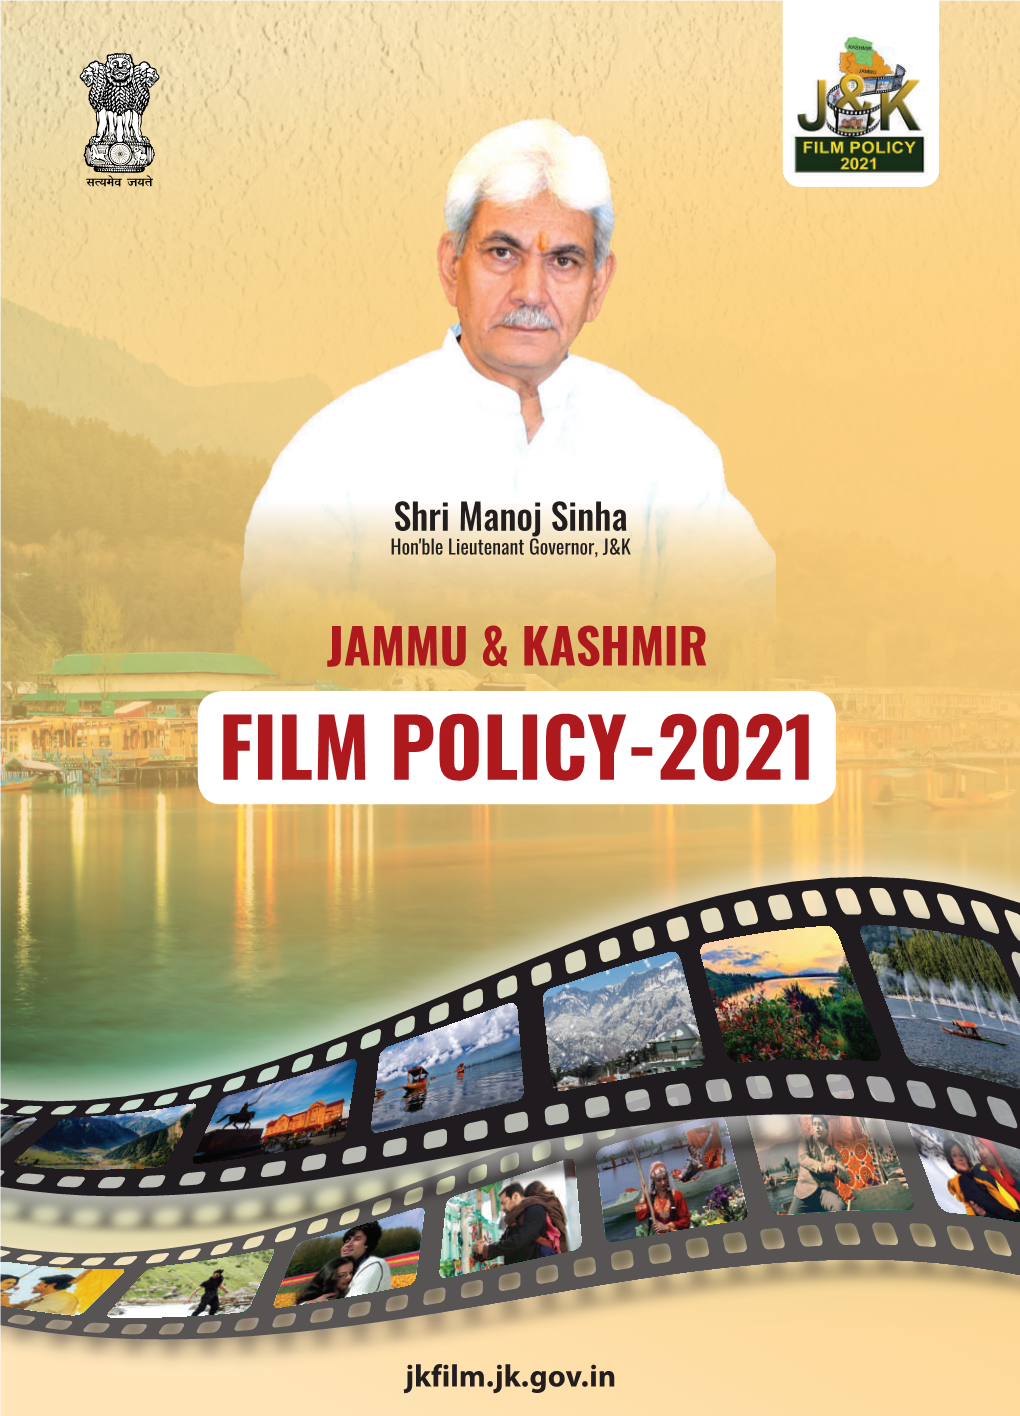 Film Policy-2021